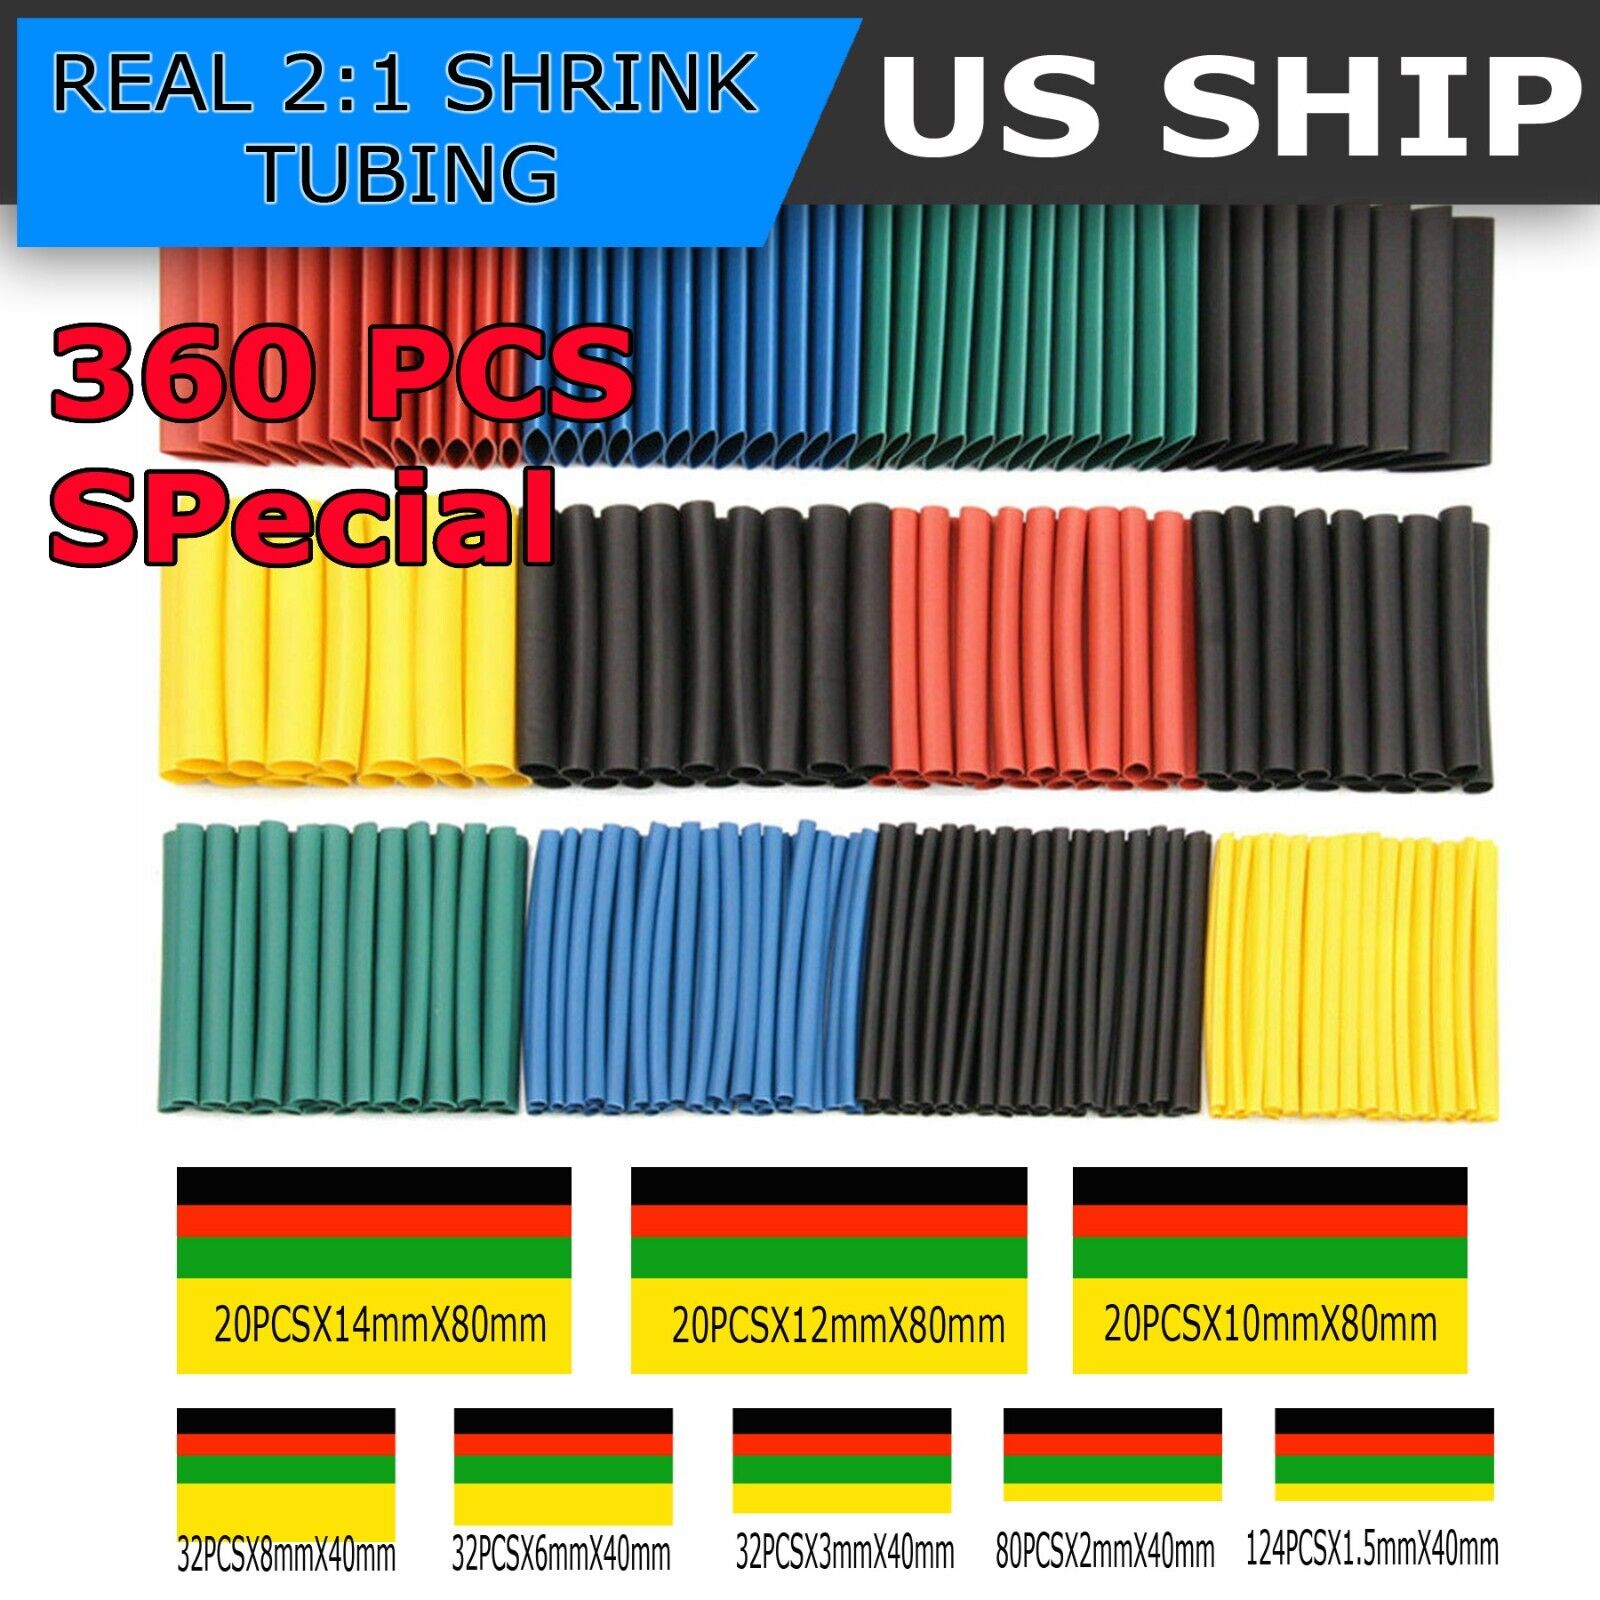 360Pcs HEAT SHRINK Tubing Insulation Shrinkable Tube 2:1 Wire Cable Sleeve